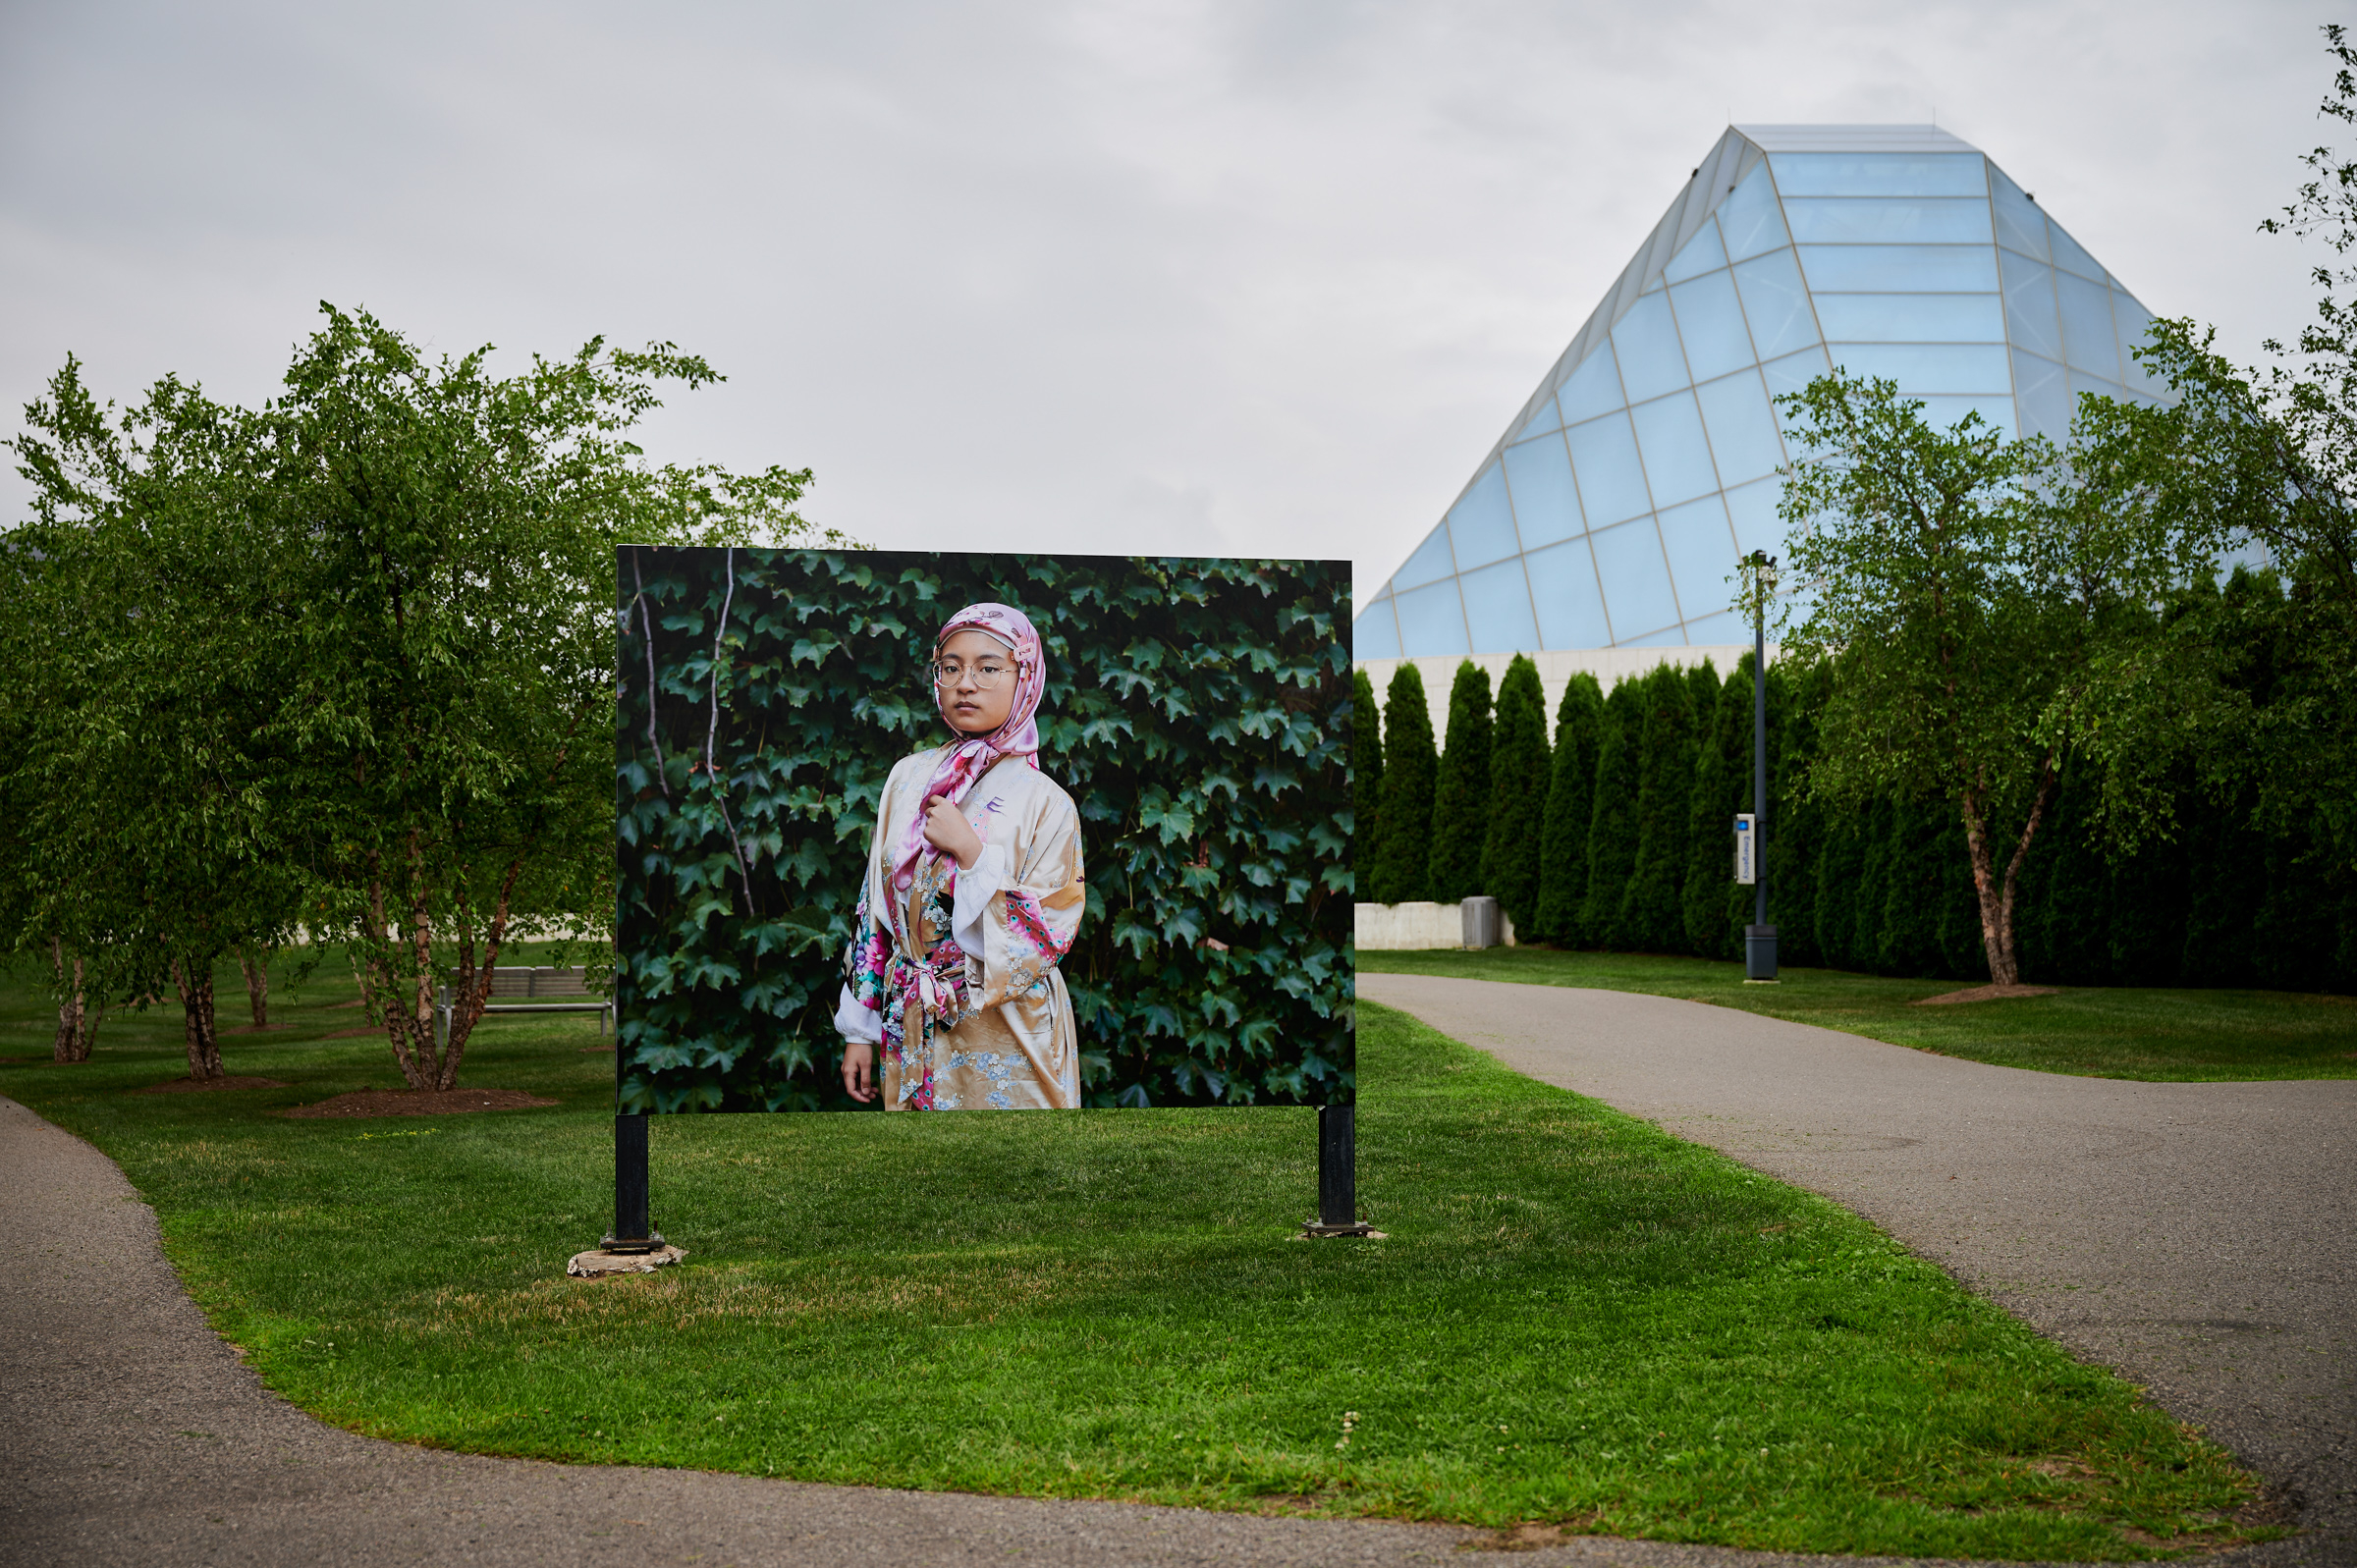     Mahtab Hussain, An Ocean in a Drop: Muslims in Toronto, installation view, Aga Khan Museum and Park, 2022. Courtesy of the artist, Aga Khan Museum, and CONTACT. Photo: Todd Fraser

